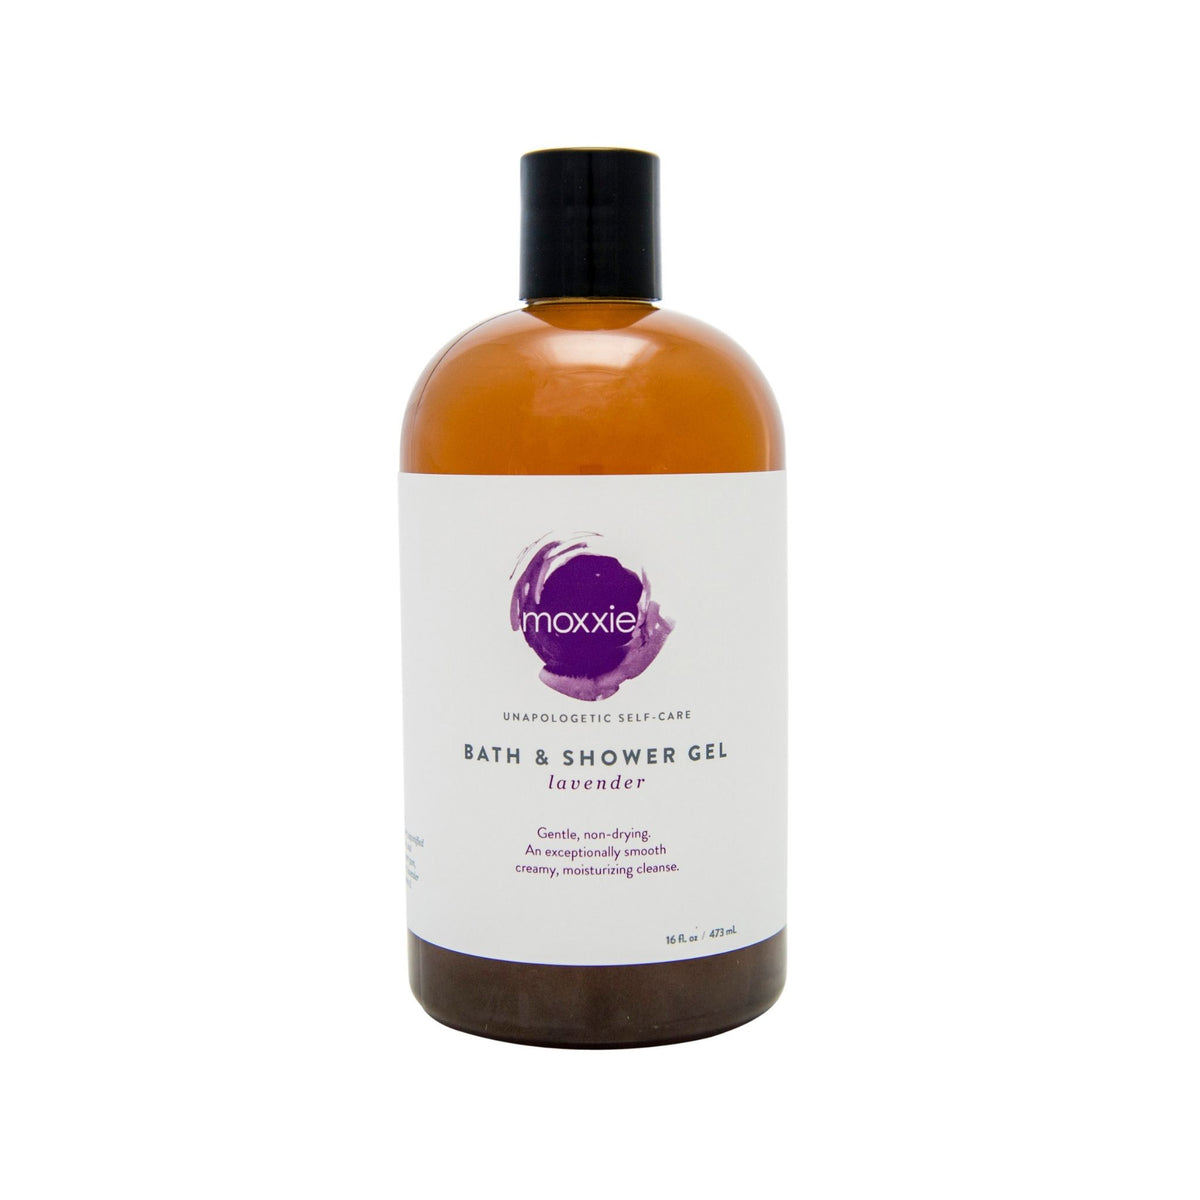 Bottle of gentle bath and shower gel, handcrafted in the US by Moxxie using all natural ingredient and essential oils